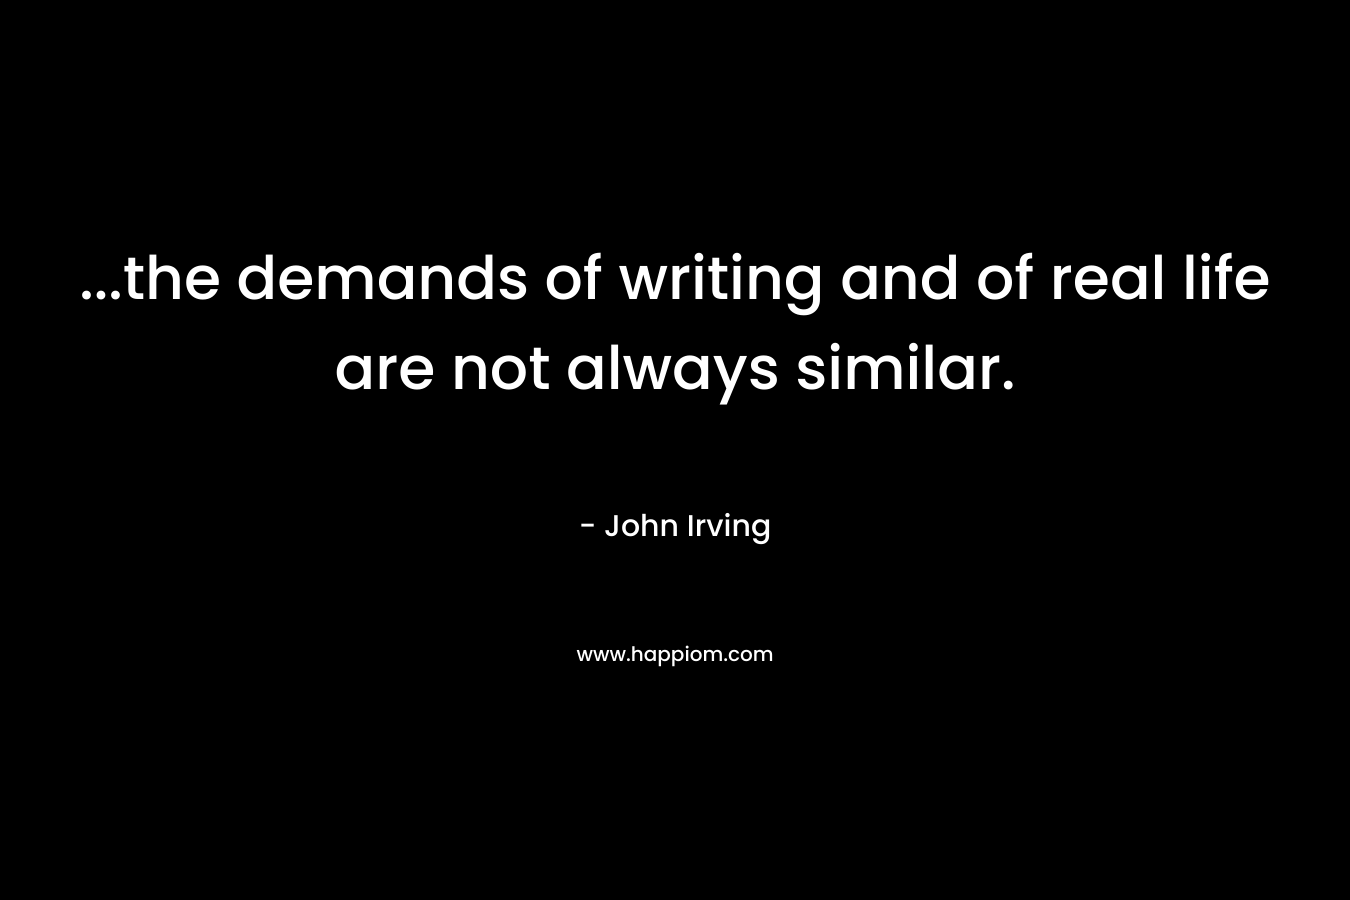 …the demands of writing and of real life are not always similar. – John Irving